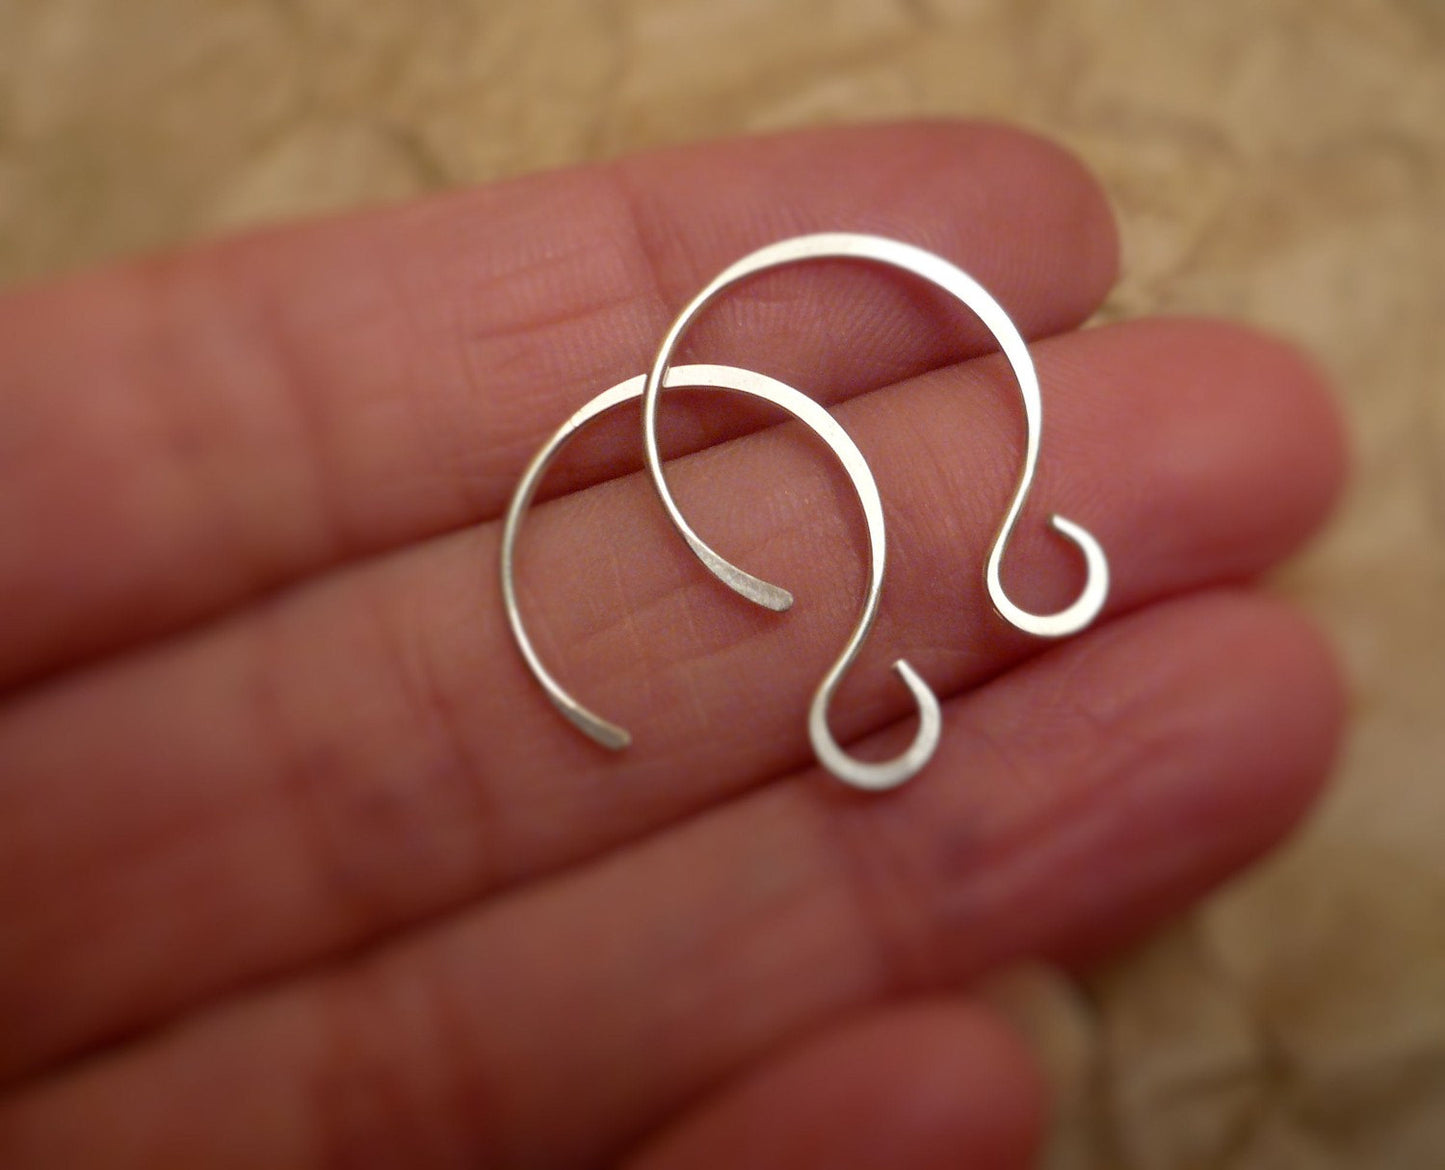 Large Solitude Sterling Silver Earwires - Handmade. Handforged. Oxidized and polished